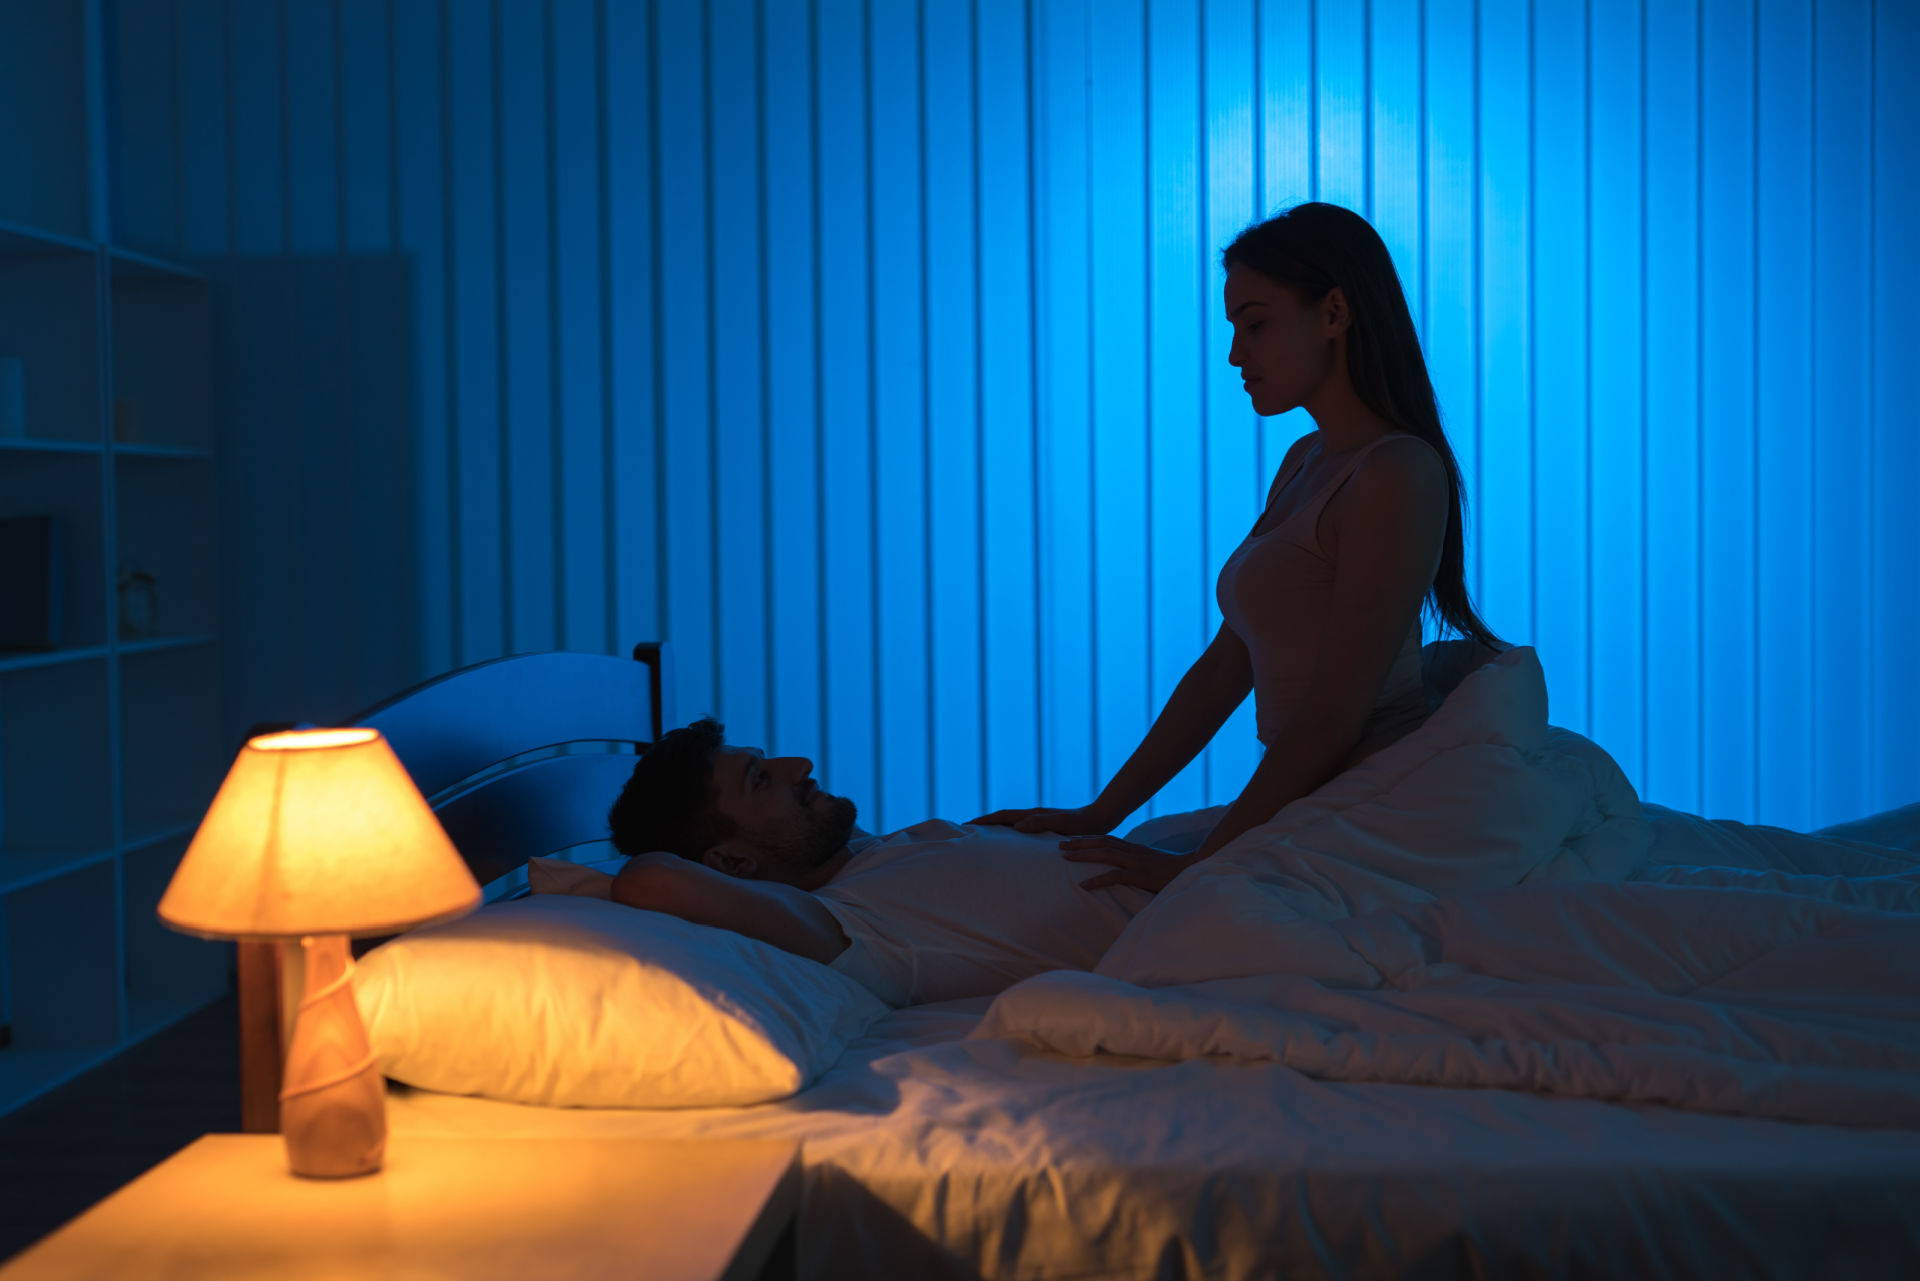 A couple in a bedroom, with the woman straddling the man on a cbd infused bed